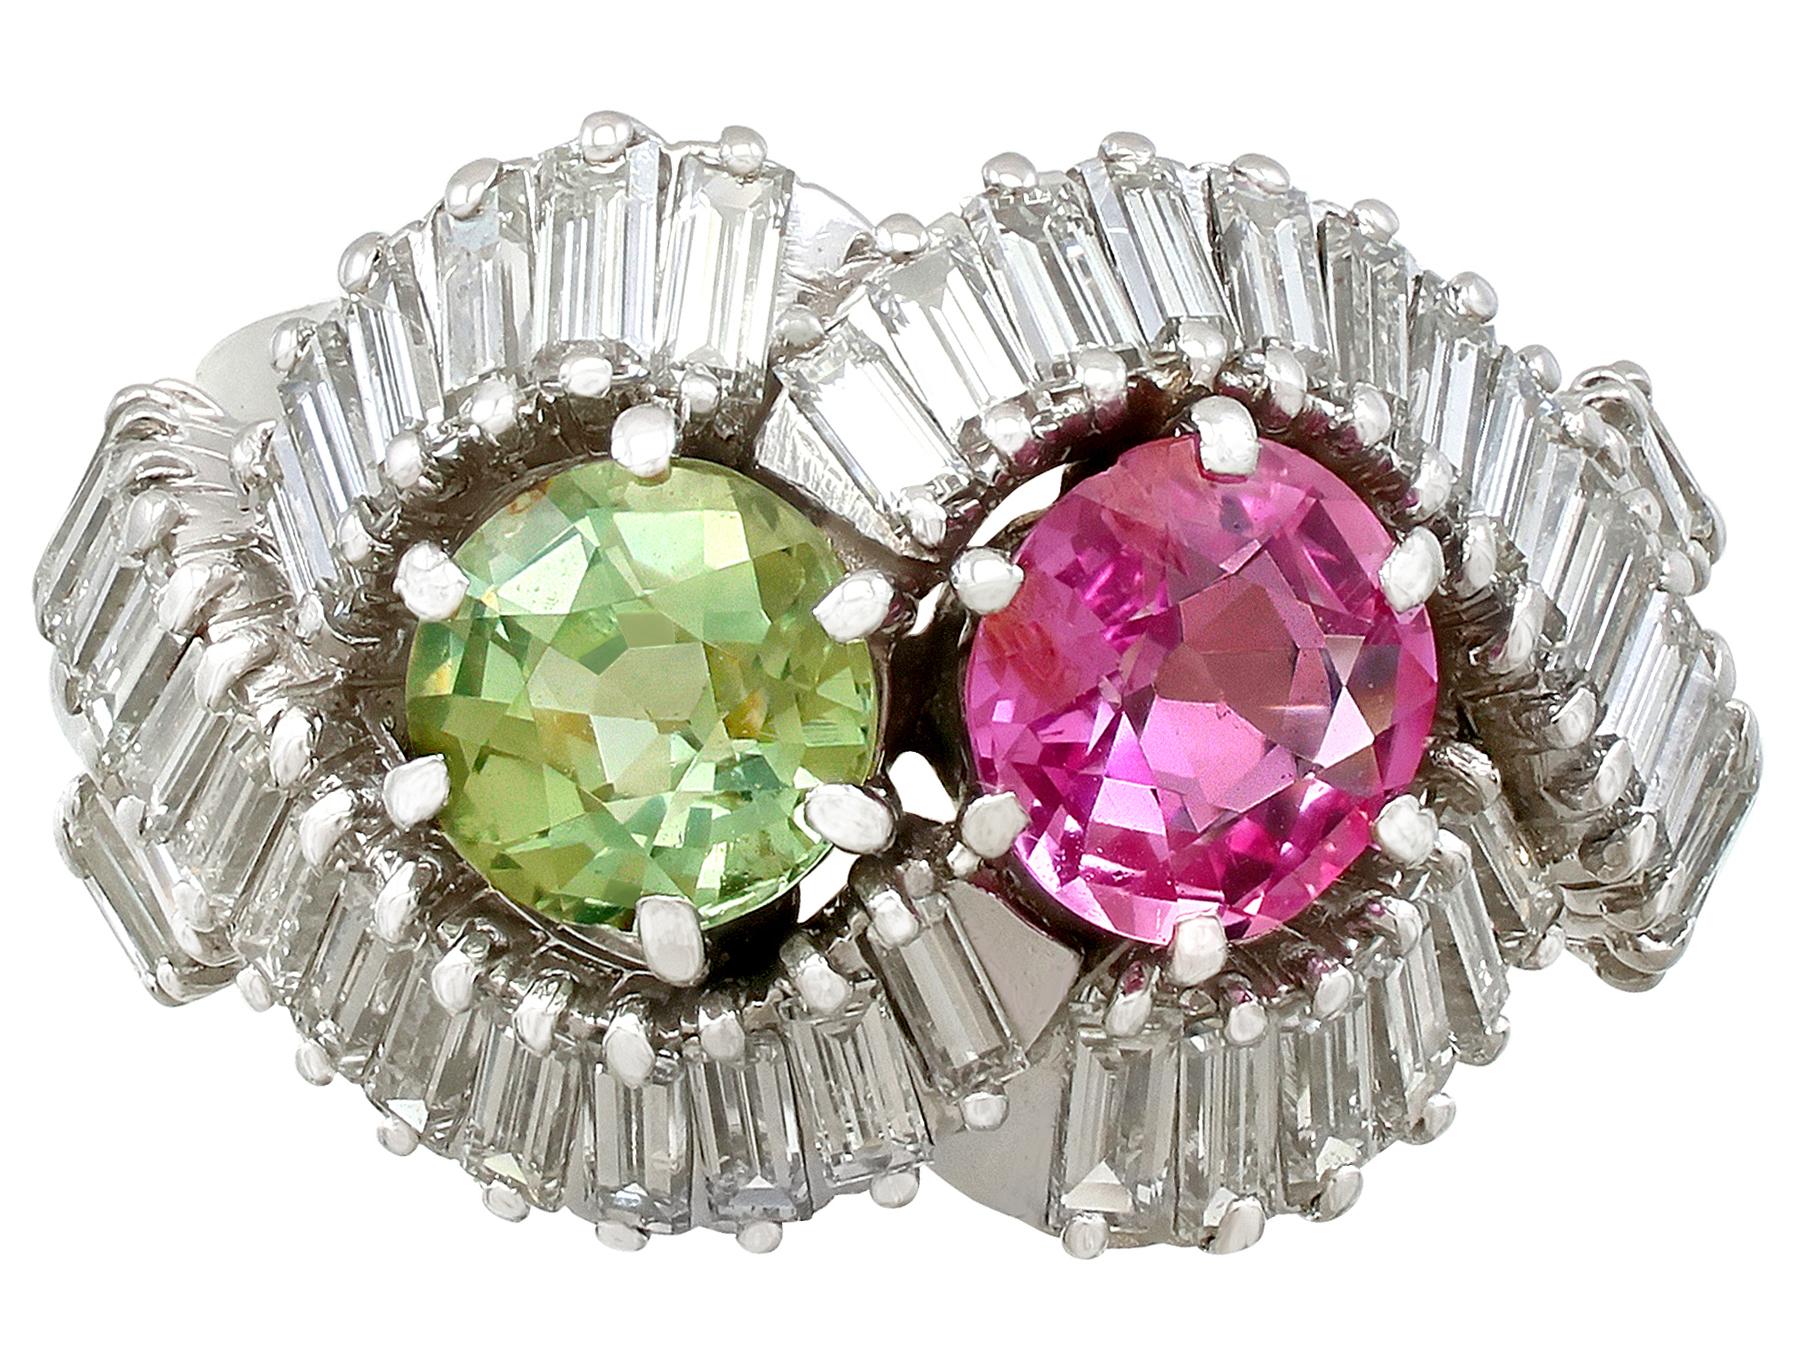 A stunning vintage French 2.34 carat pink and green sapphire, 2.45 carat diamond and platinum dress ring by Boucheron; part of our diverse gemstone jewelry collections.

This stunning, fine and impressive vintage sapphire ring has been crafted in